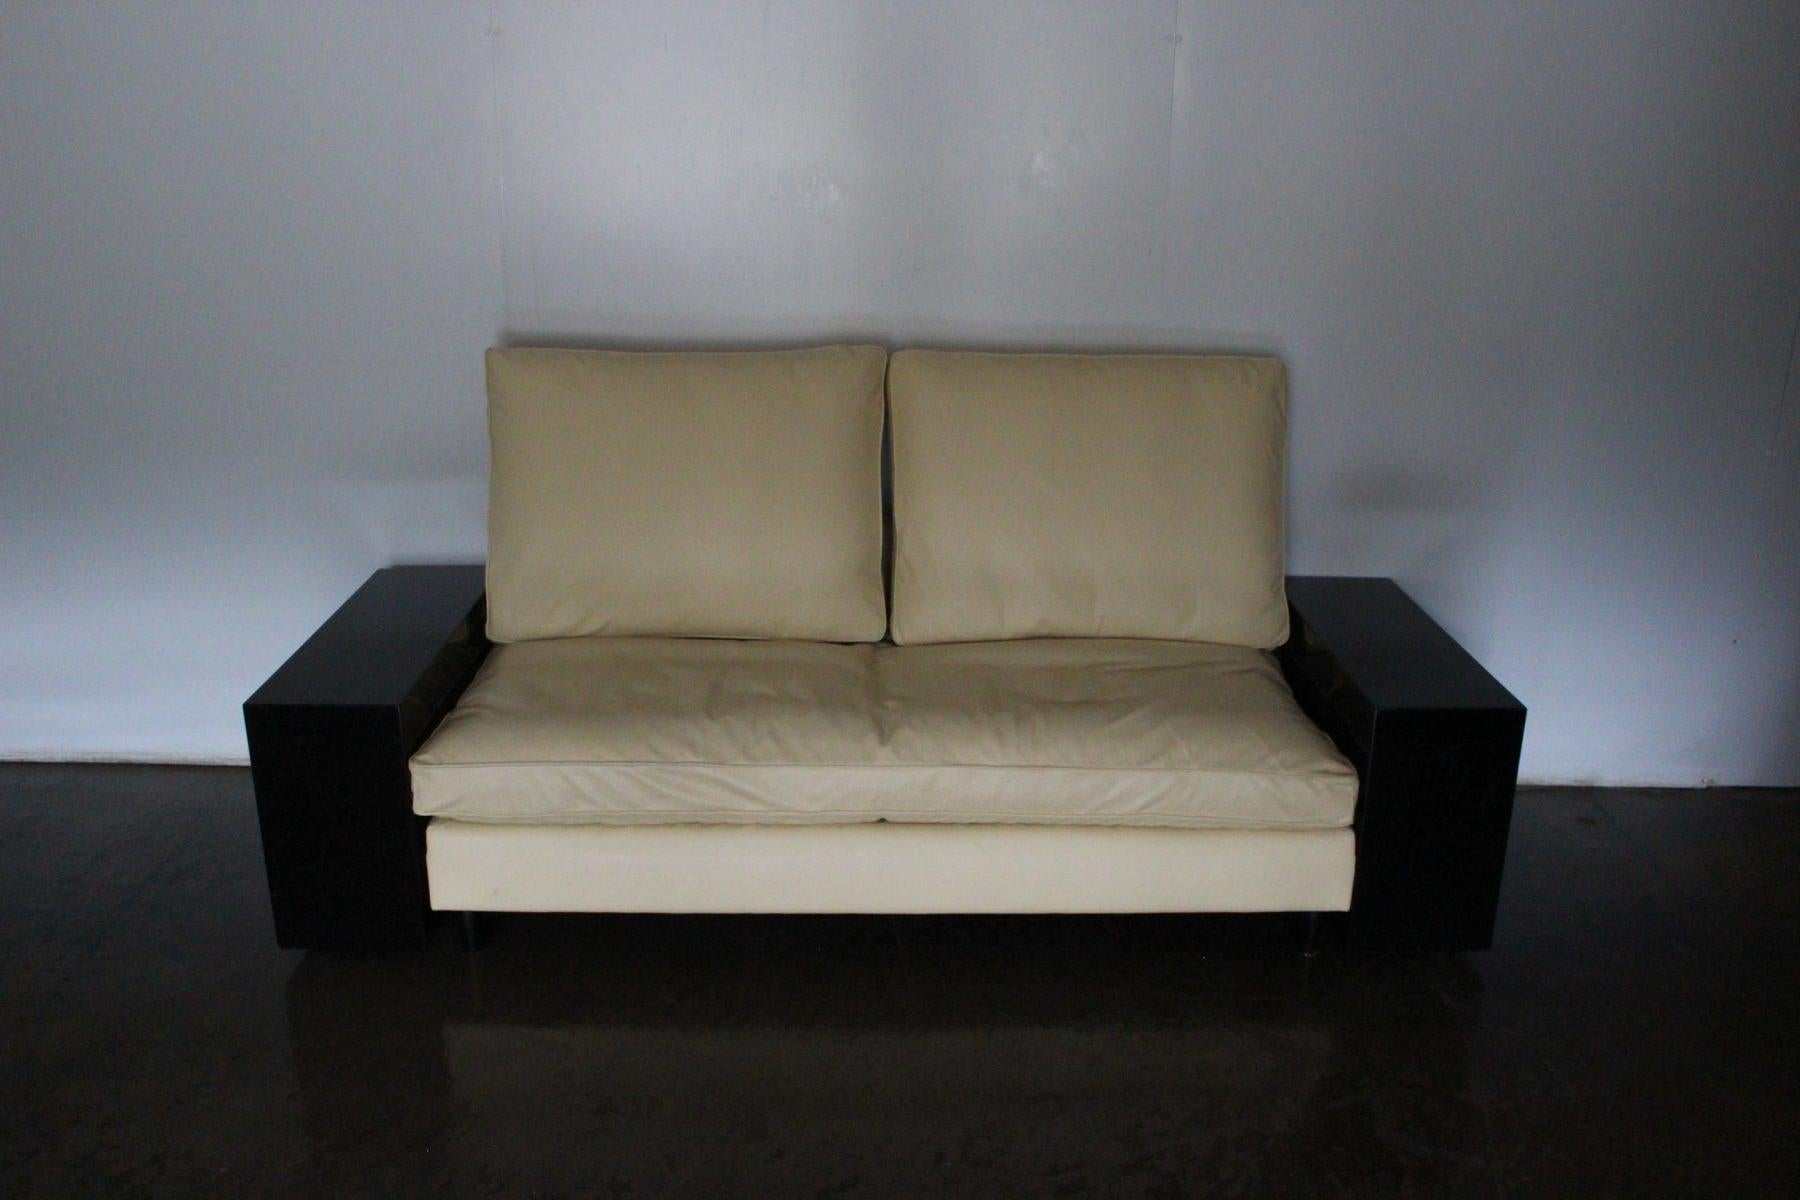 Contemporary Pair of Aram “Eileen Gray Lota” Sofas in Cream Leather For Sale